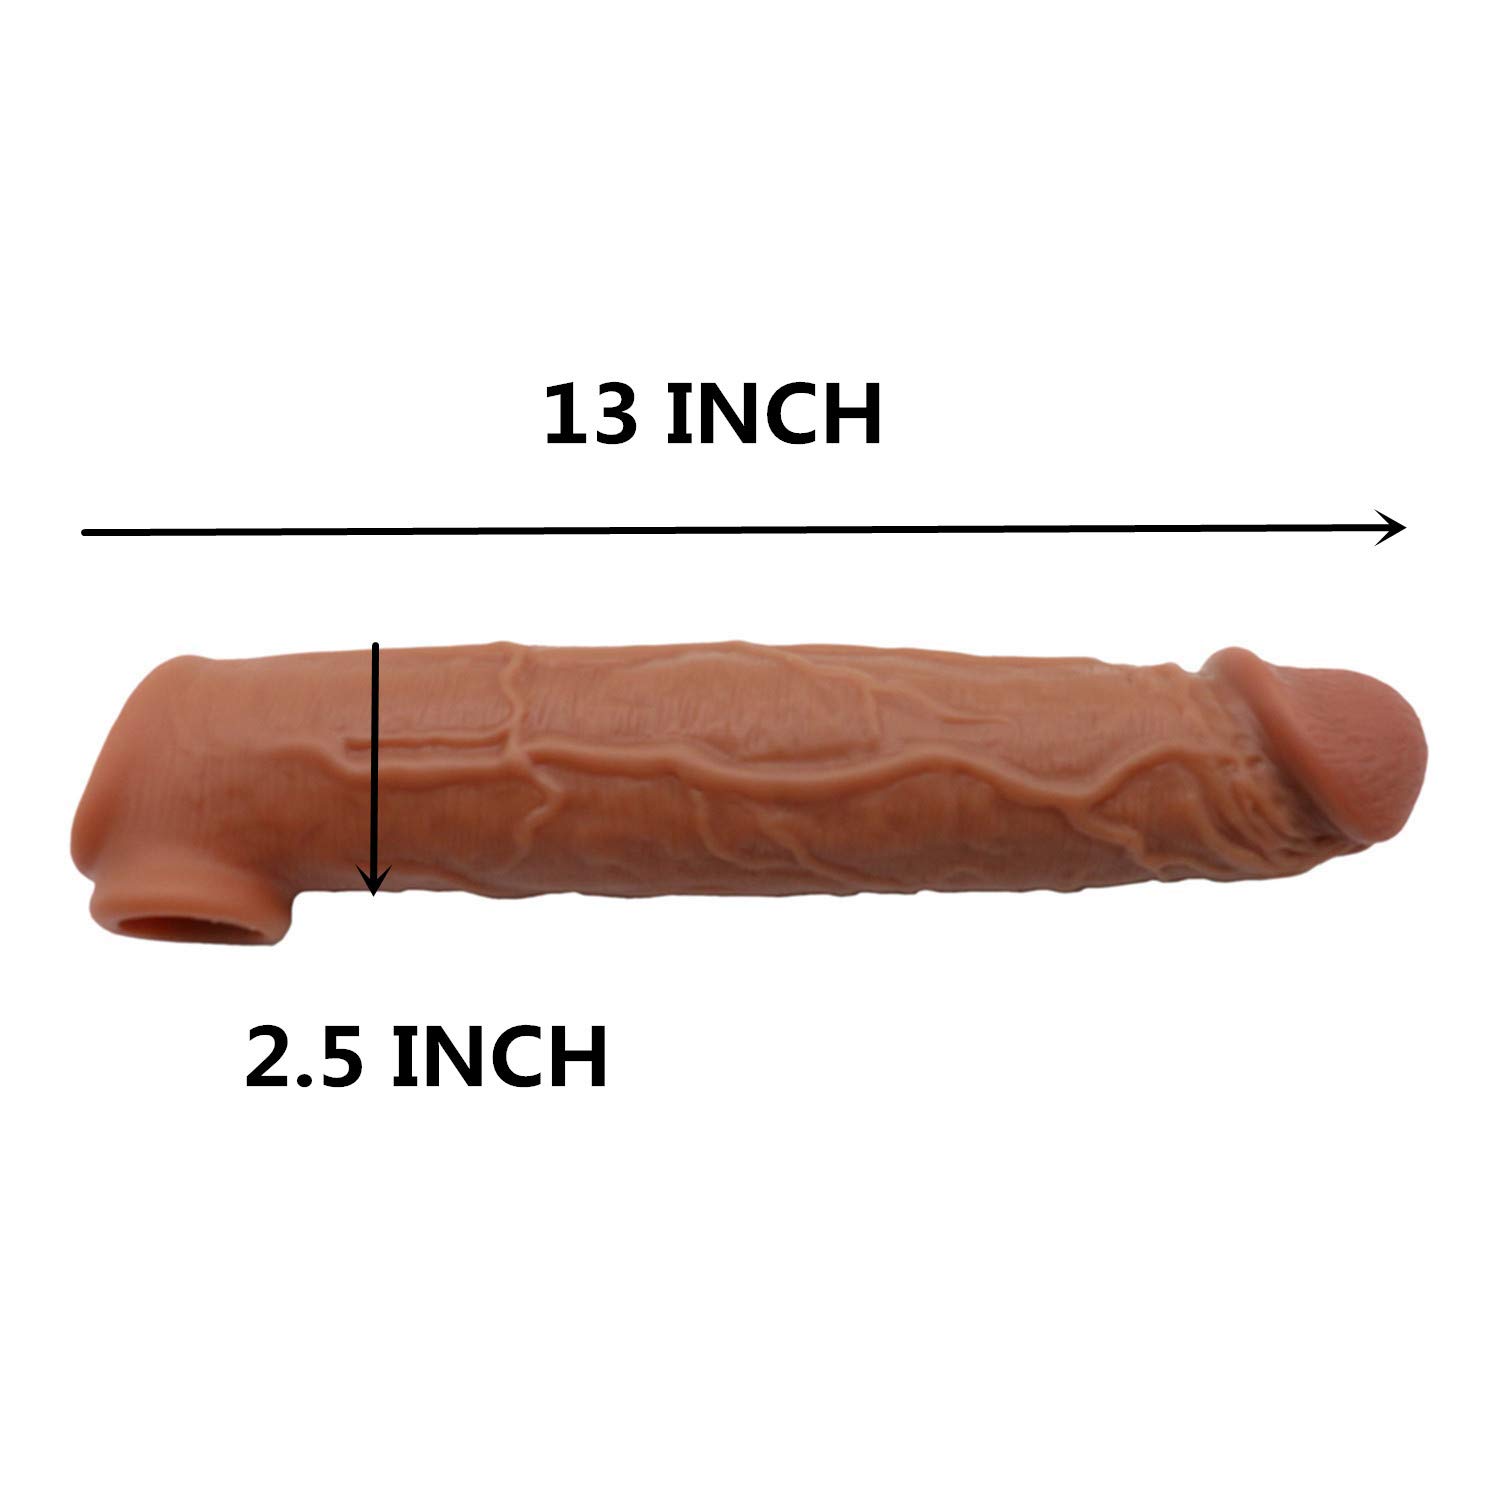 cameron sivey recommends 13 inch penis pic